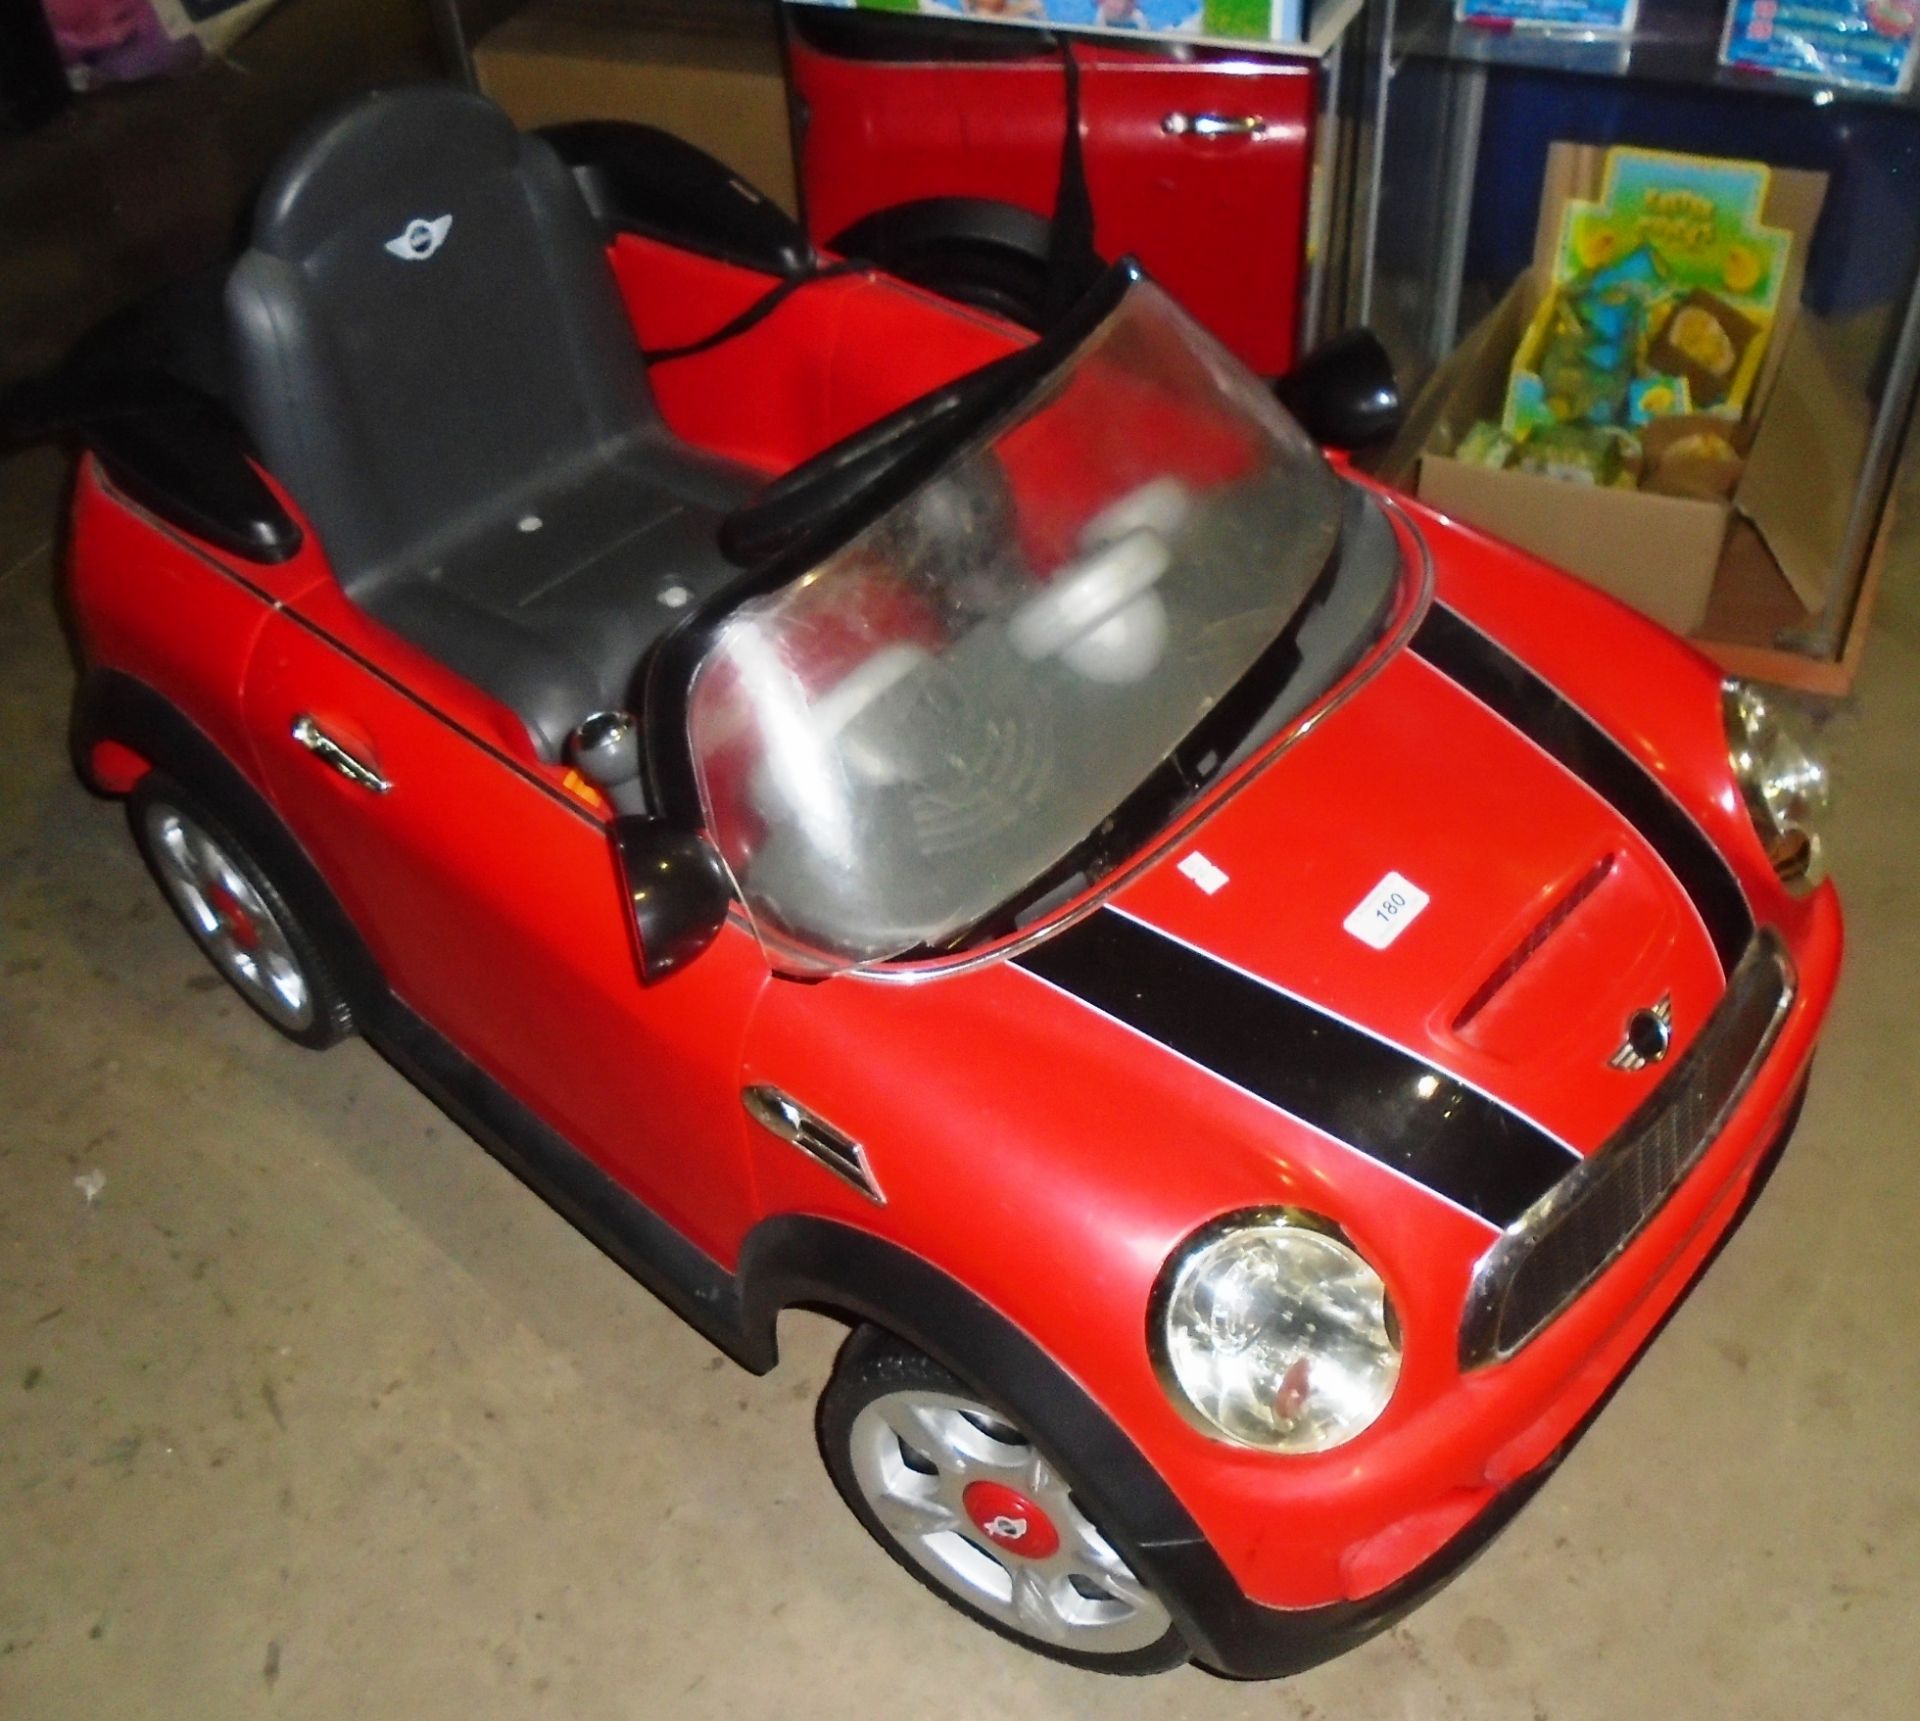 A Mini Cooper children's battery powered ride on car complete with charger